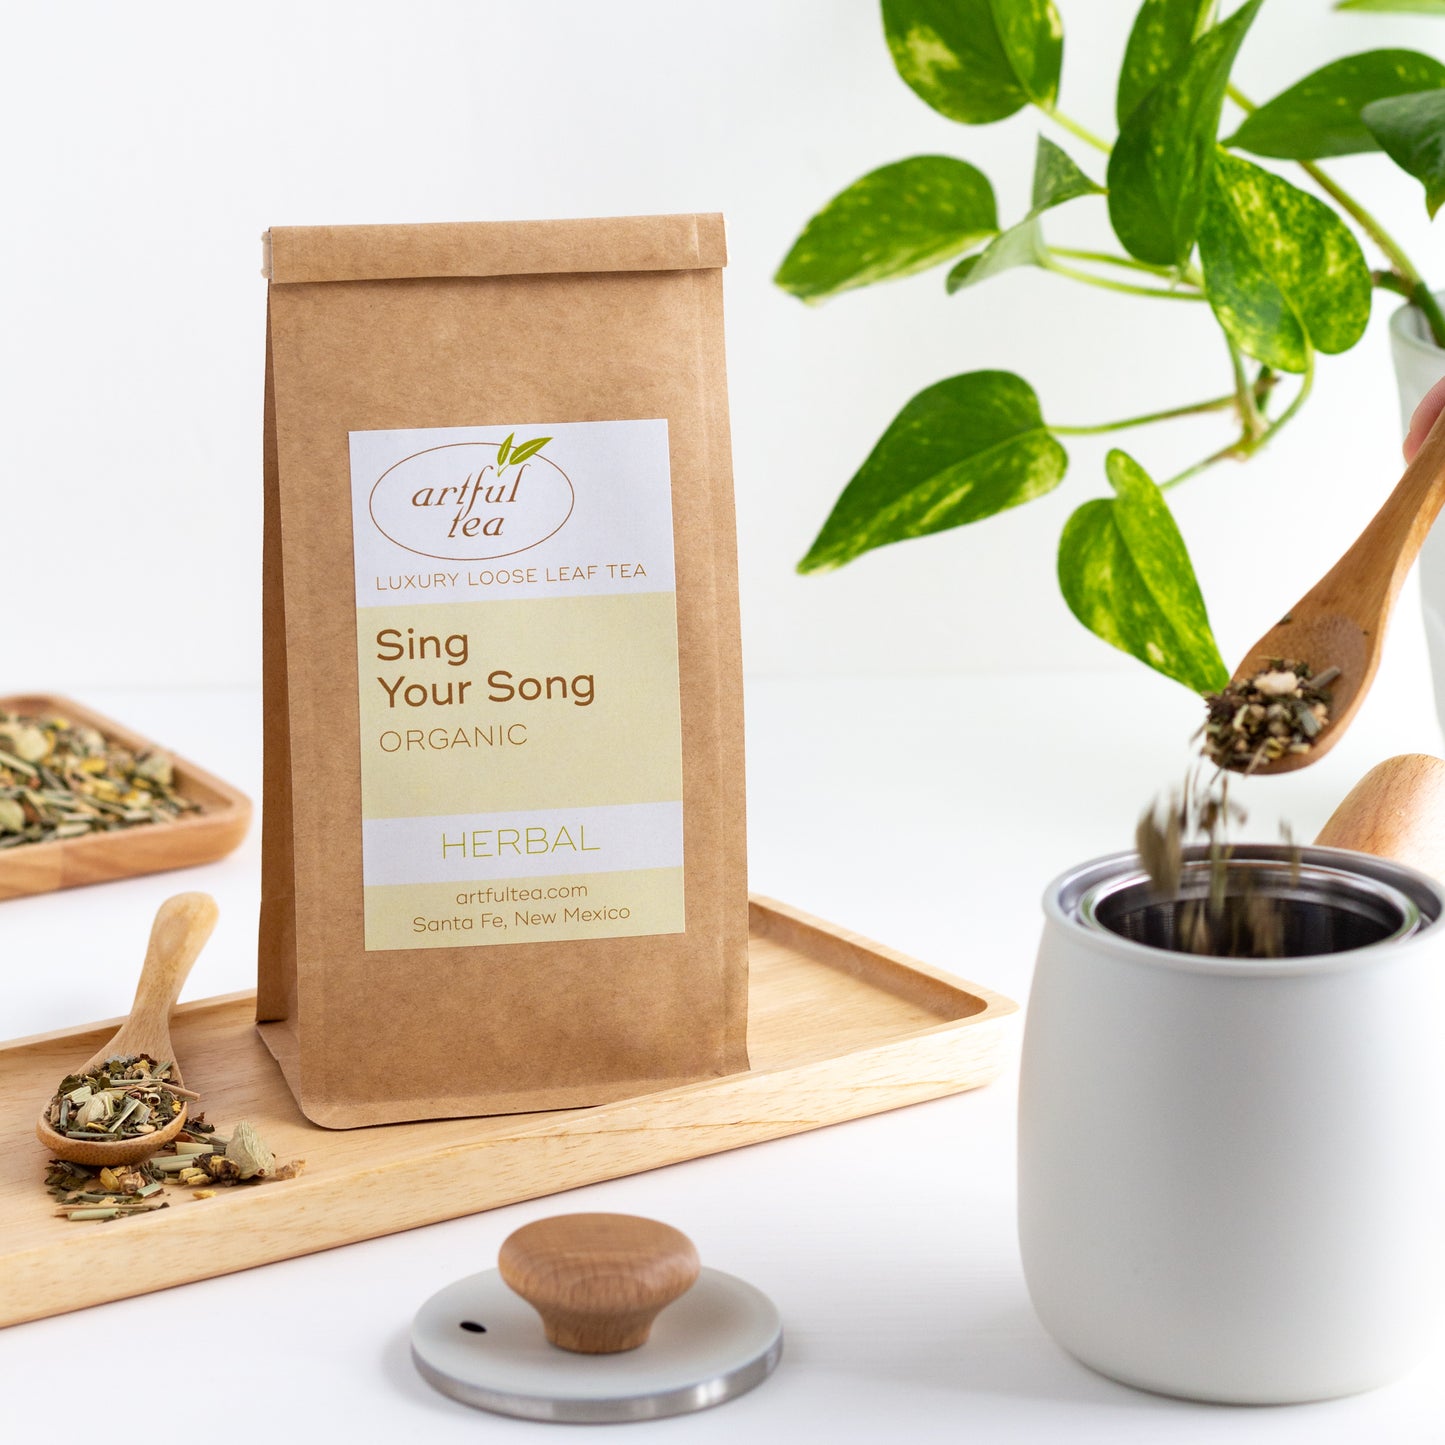 Organic Sing Your Song Herbal Tea shown packaged in a kraft bag, displayed on a wooden tray. Tea leaves are being spooned into a white teapot in the foreground. A green plant is in the background.